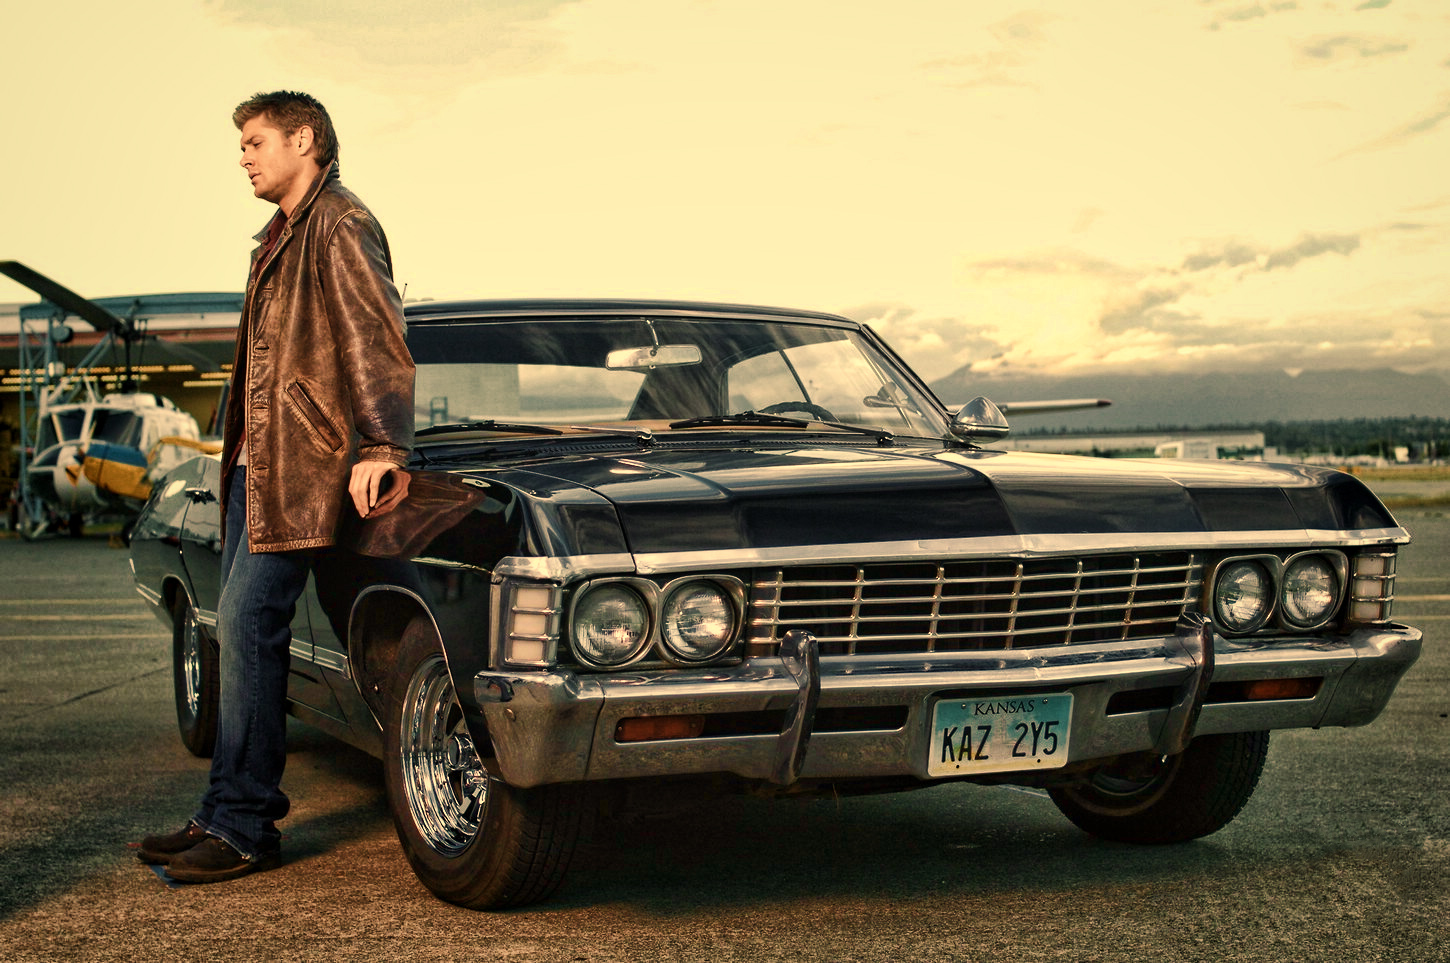 Dean-Winchester-with-Chevrolet-Impala-1967-supernatural-31507862-1450-963.jpg